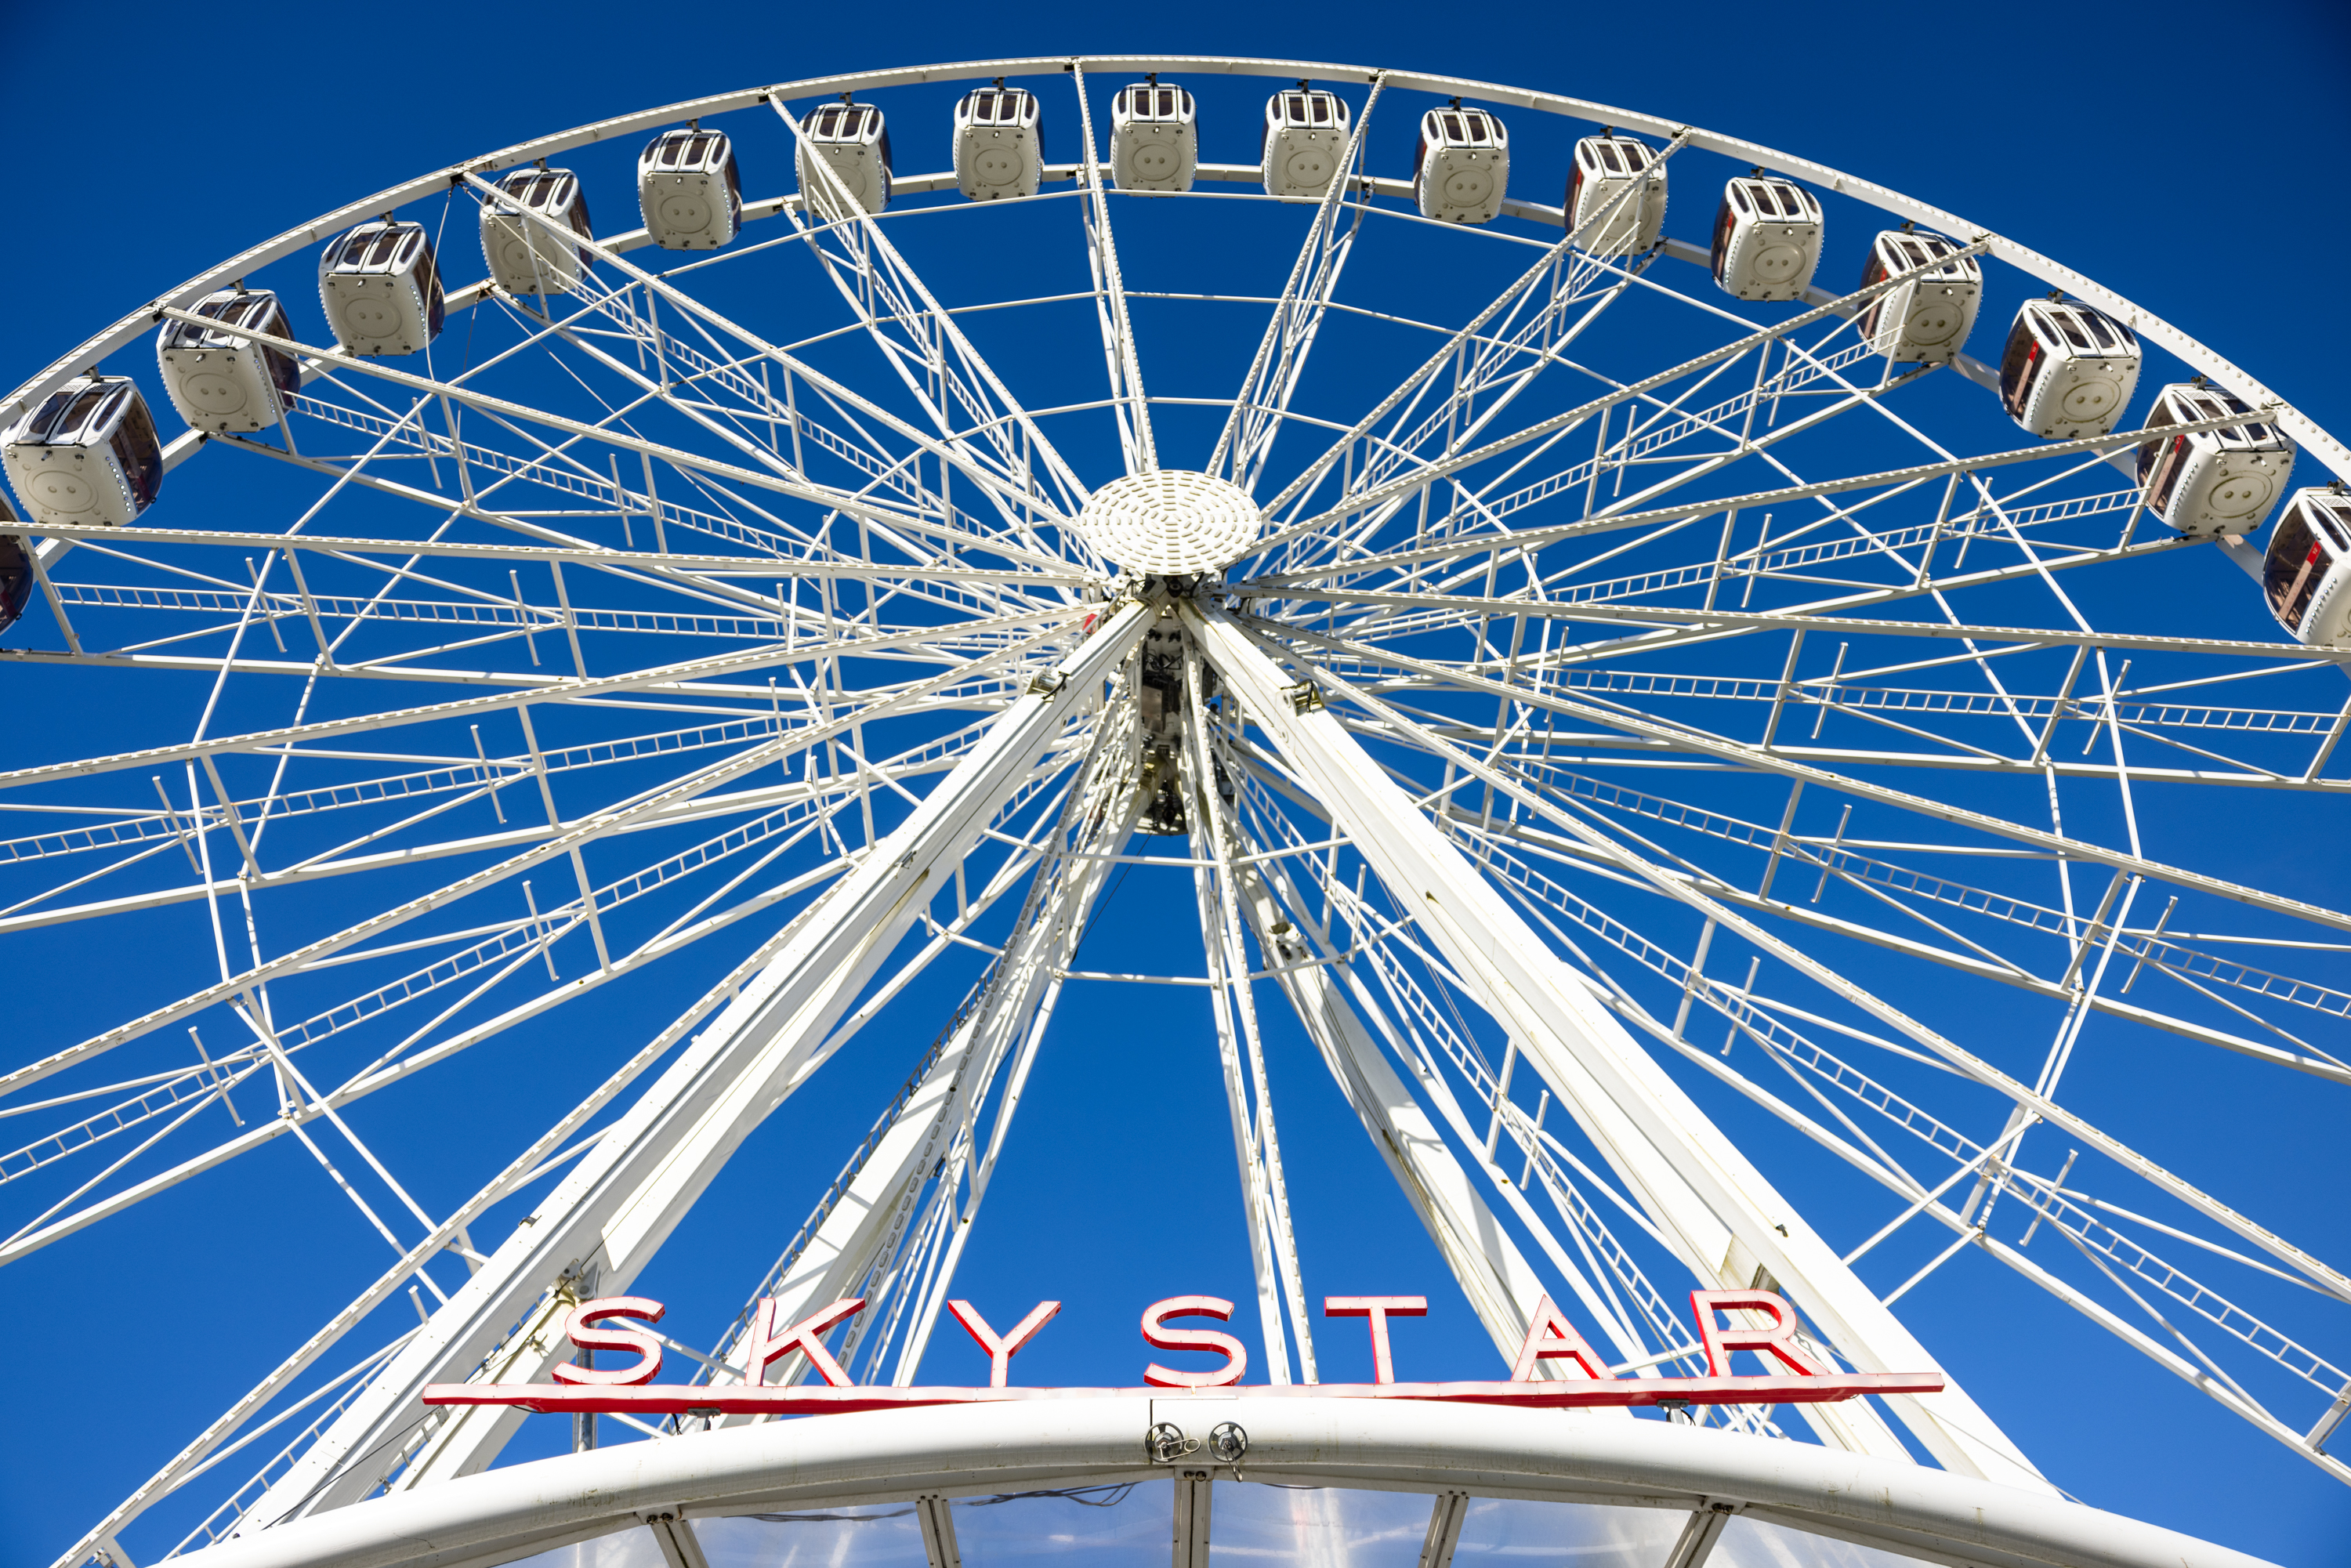 A large white Ferris wheel named "SKY STAR" under a clear blue sky, with enclosed gondolas on the rim.